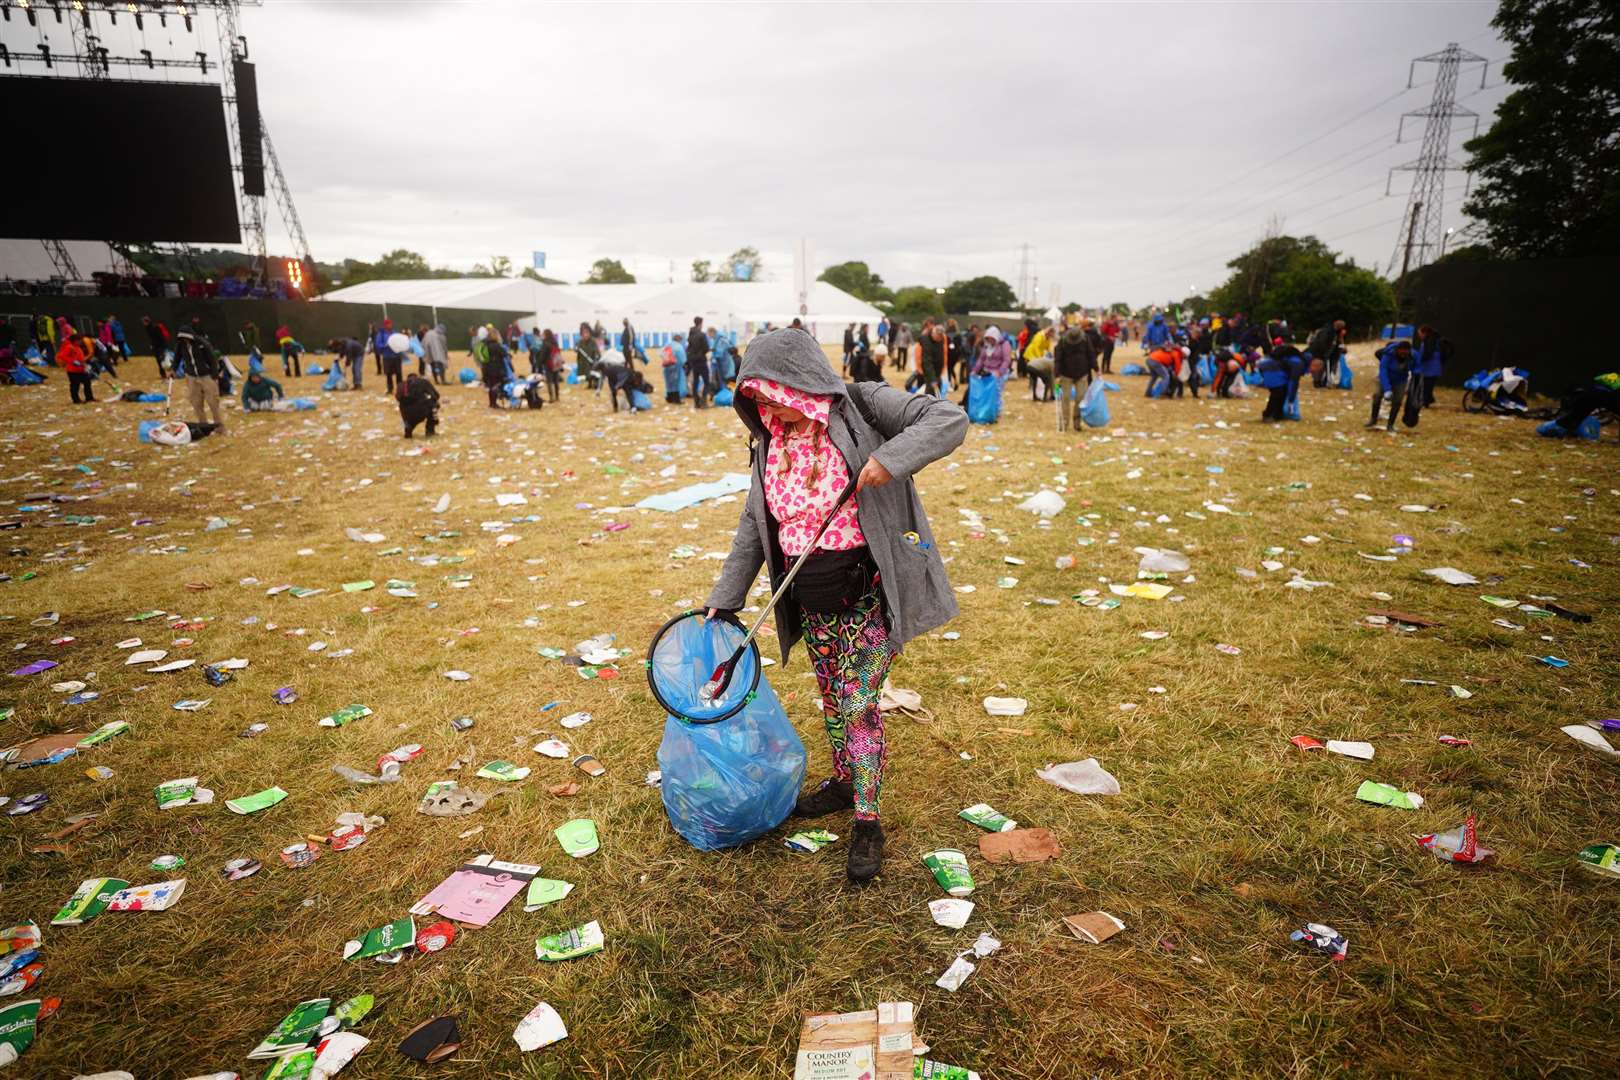 It takes effort to turn the festival back into a dairy farm site (Ben Birchall/PA)